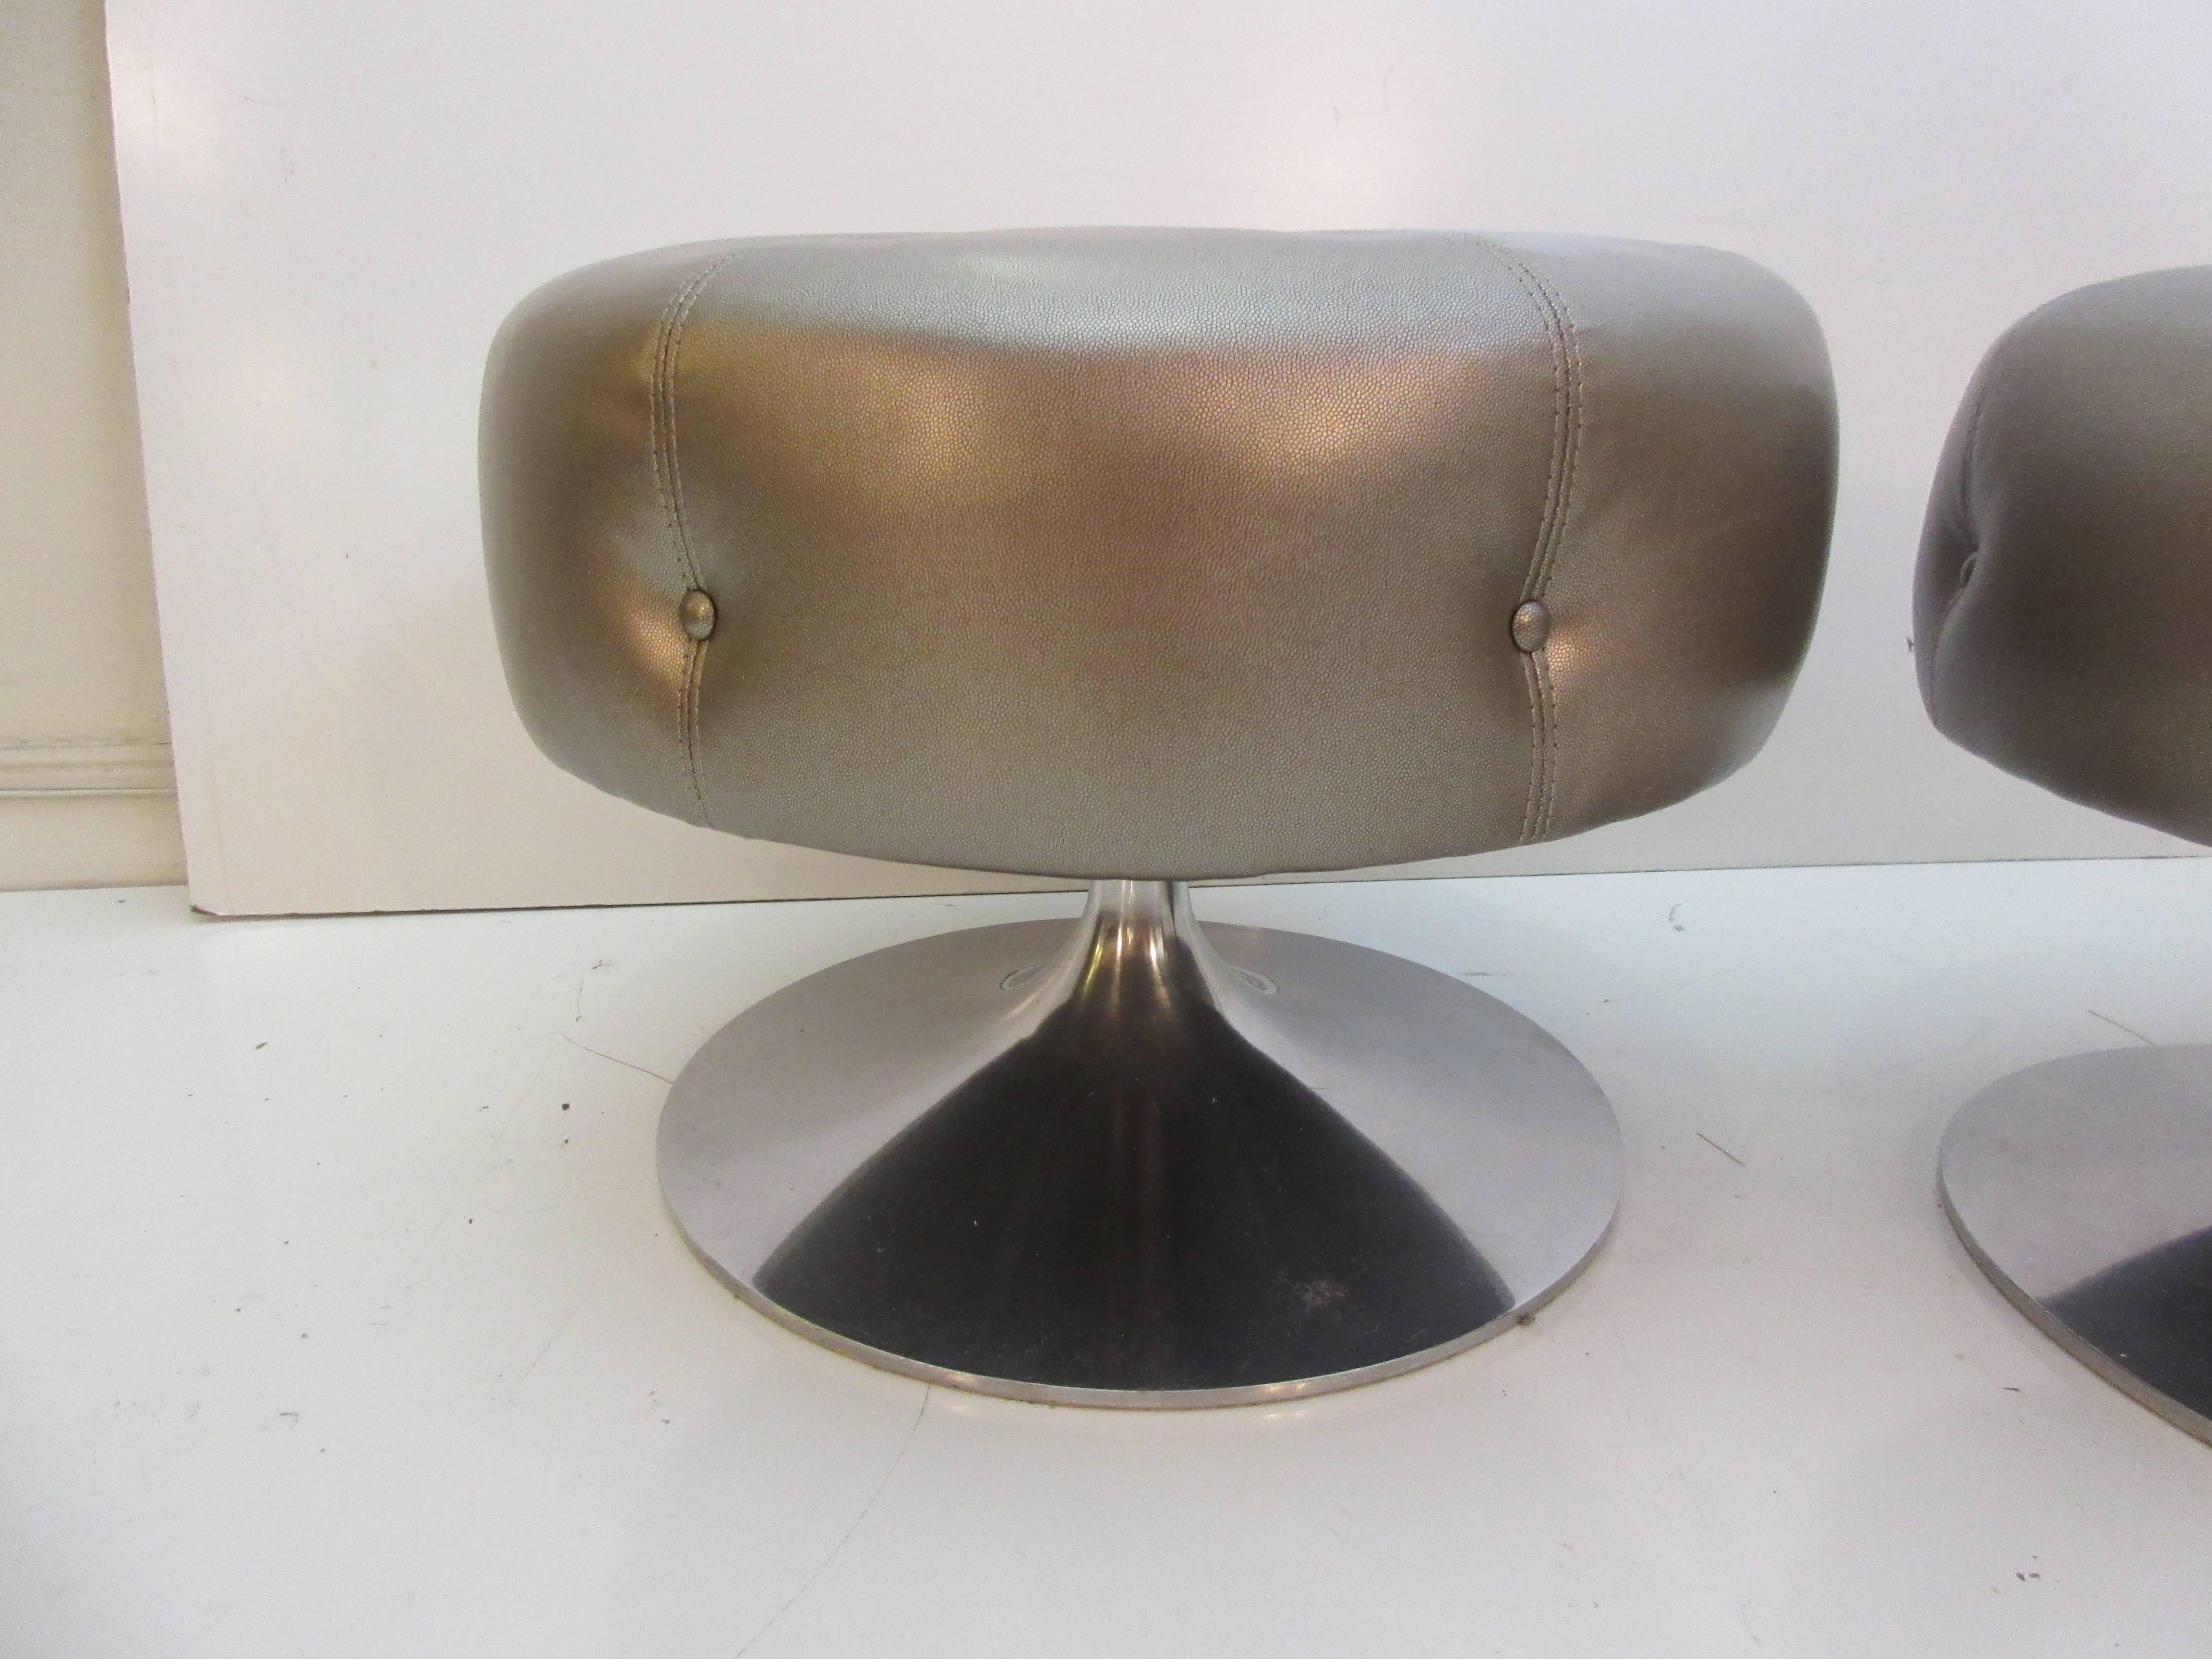 Selig swivelling stools with cast aluminium bases and embossed sharkskin vinyl (close up provided in pictures). Freshly redone from original 1970s unltrasuede. Label still intact.